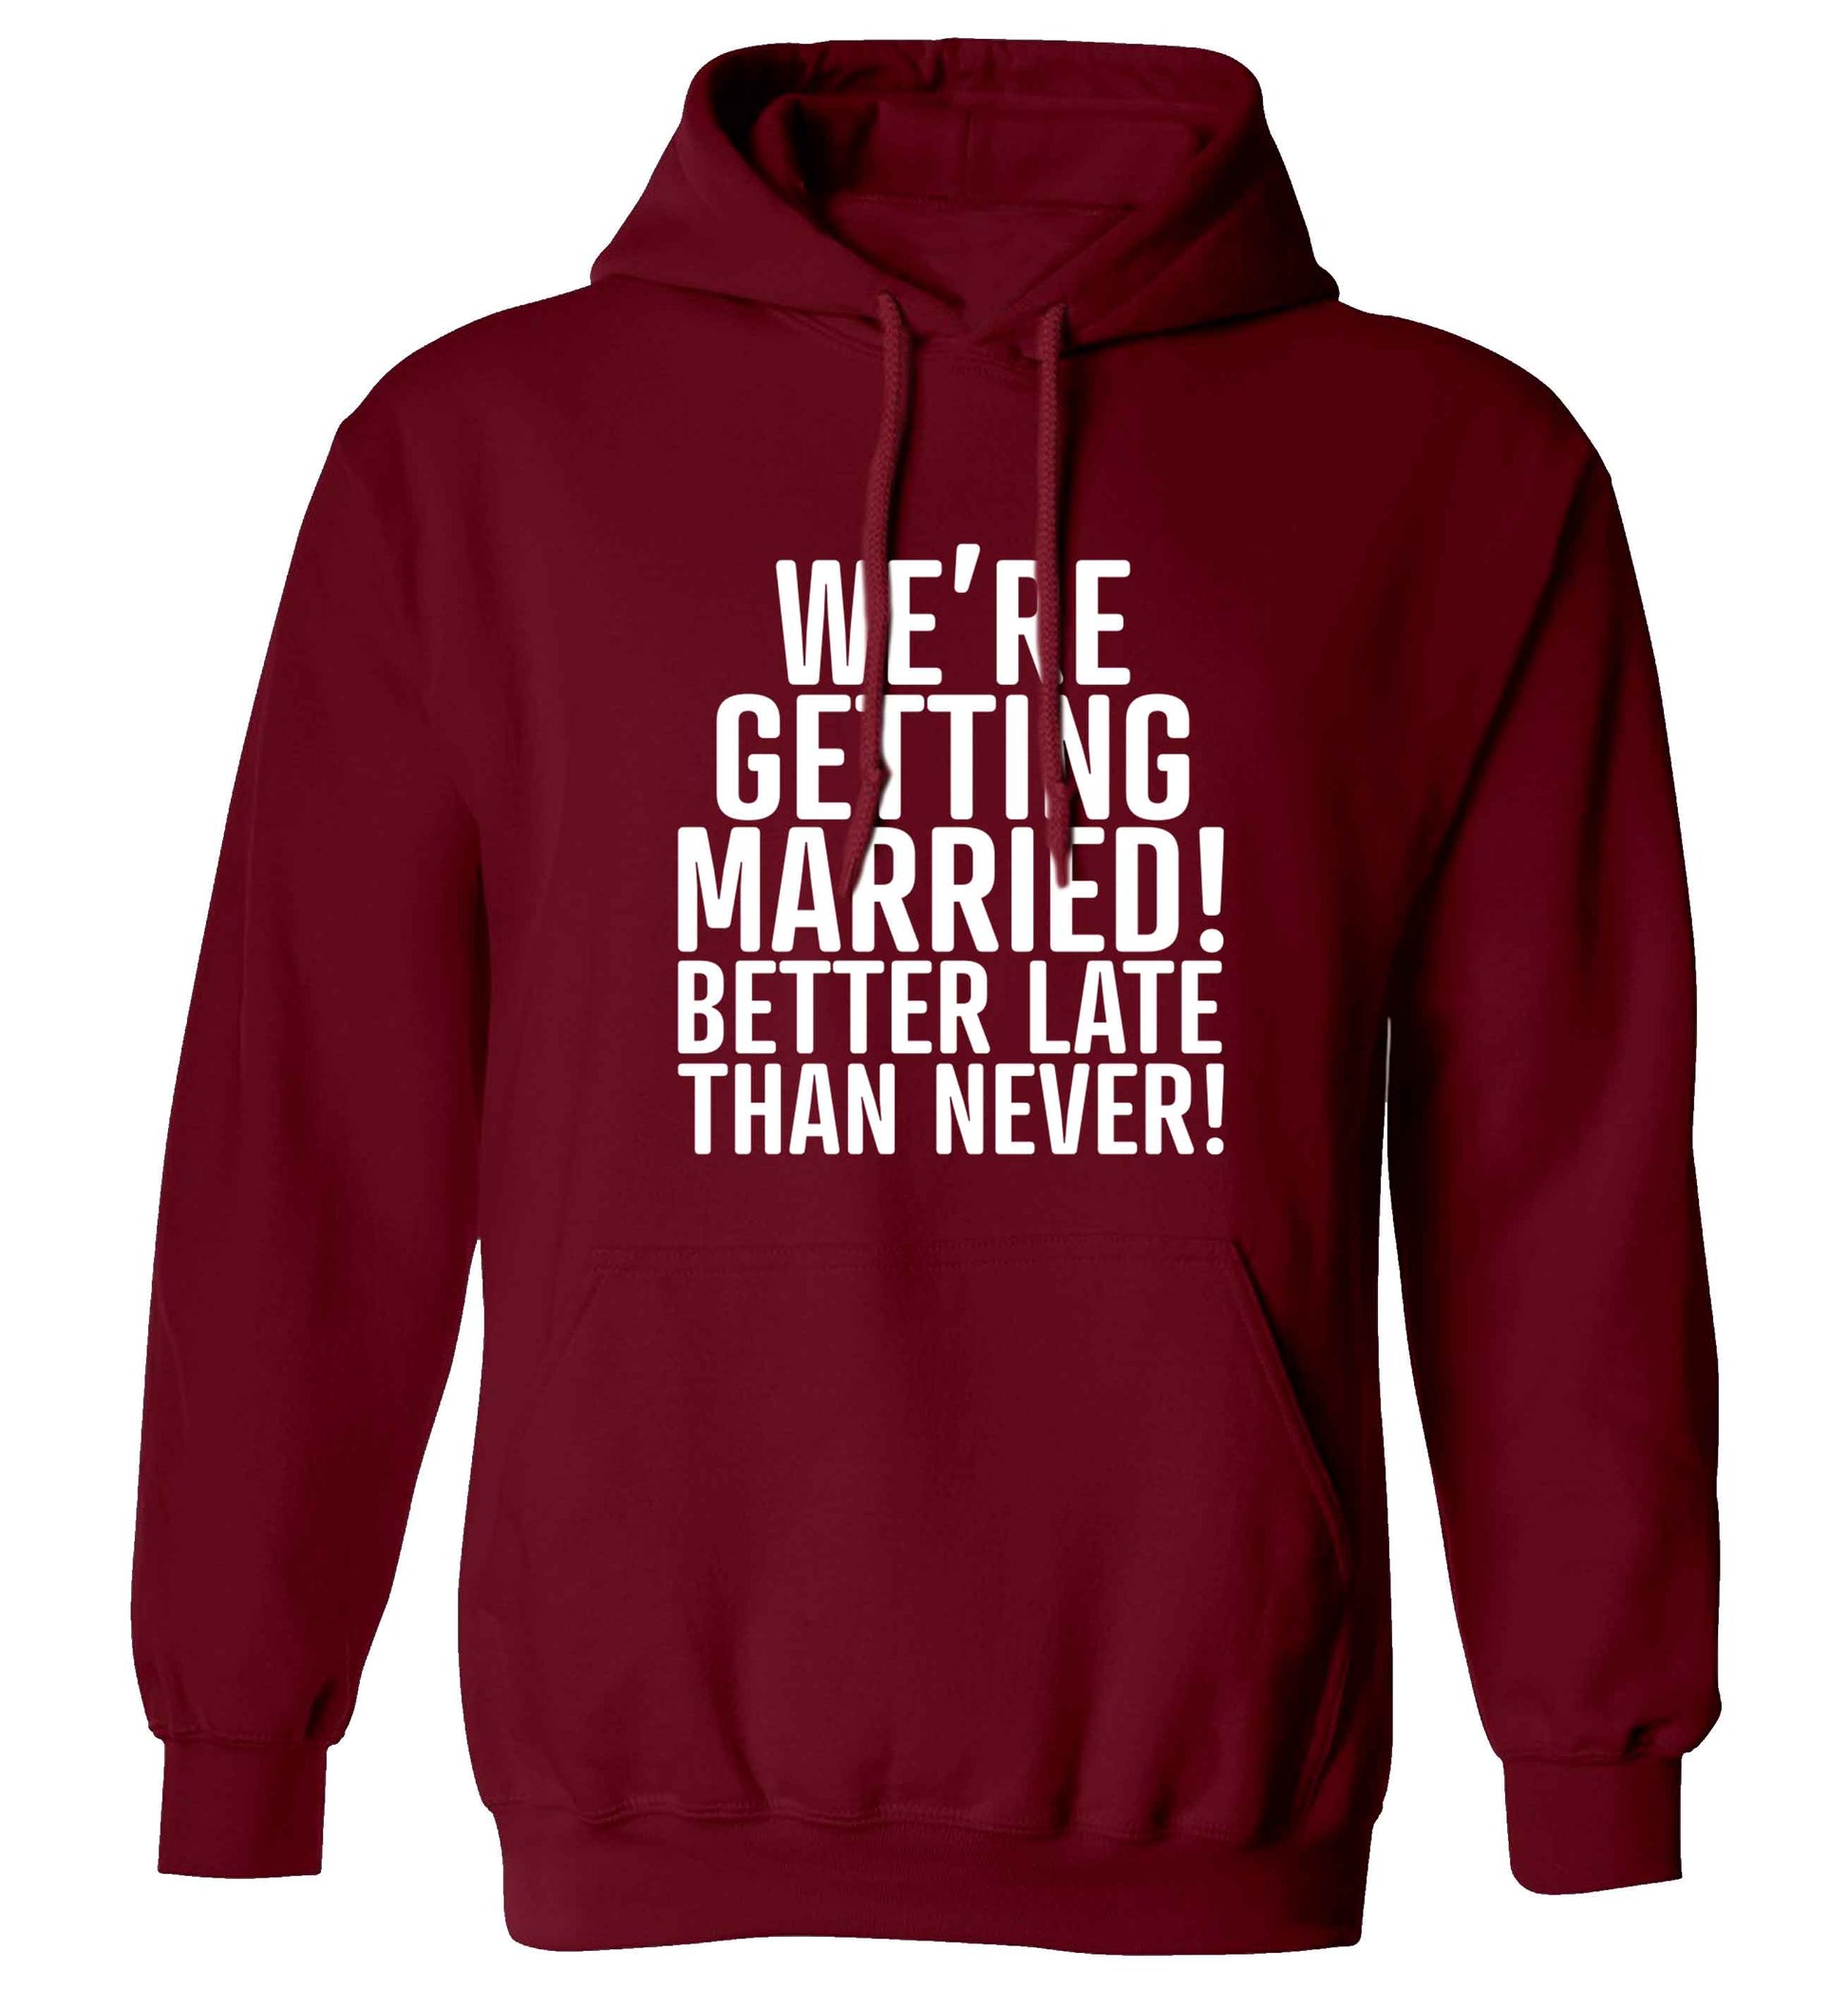 Always the bridesmaid but never the bride? Until now! adults unisex maroon hoodie 2XL